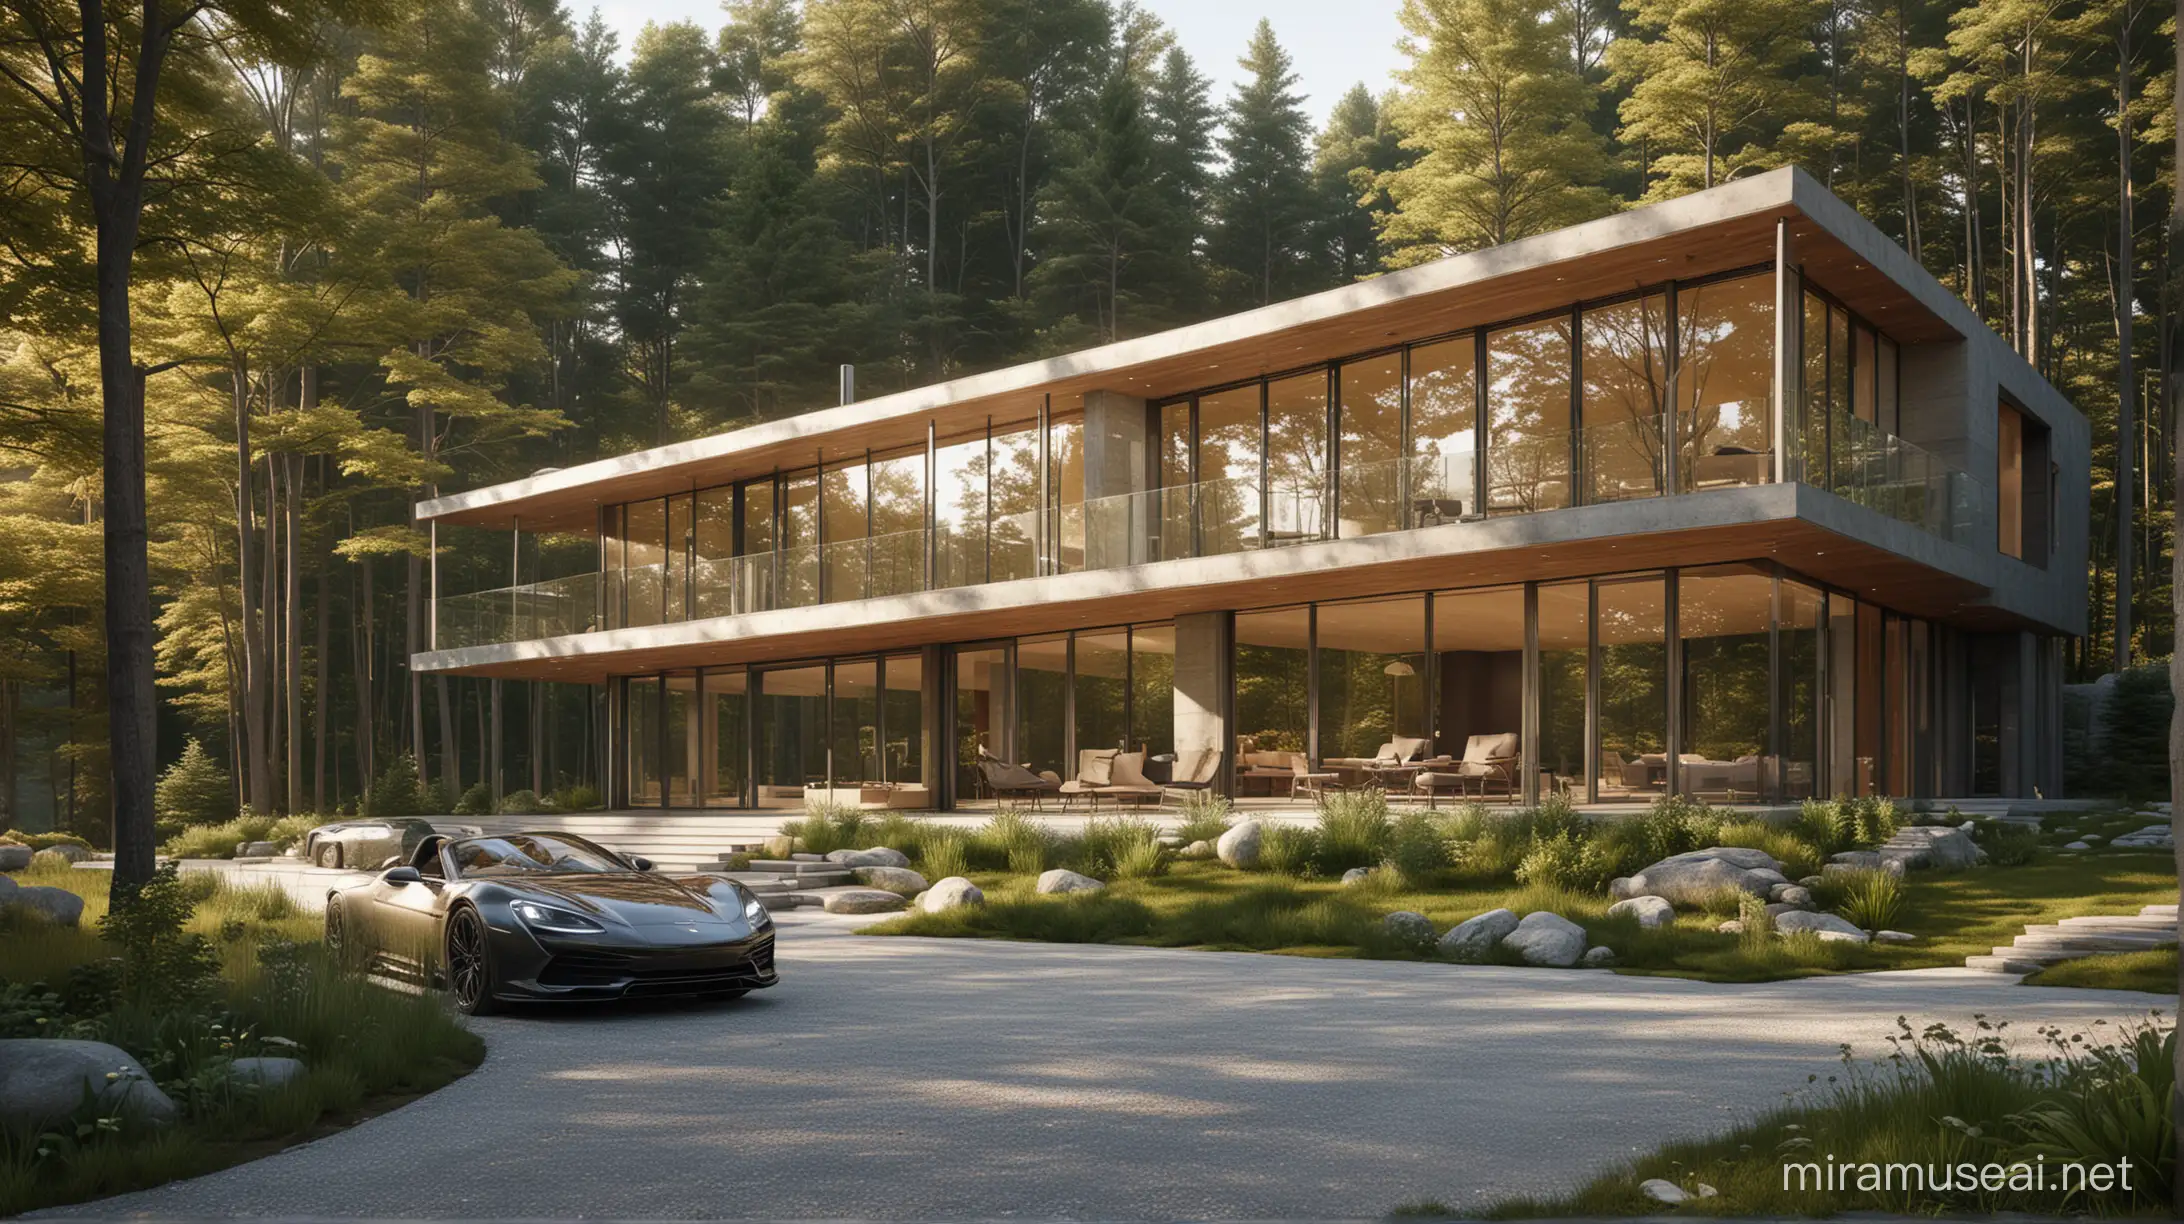 Luxurious Modern House in Serene Forest Setting with HighEnd Sports Cars